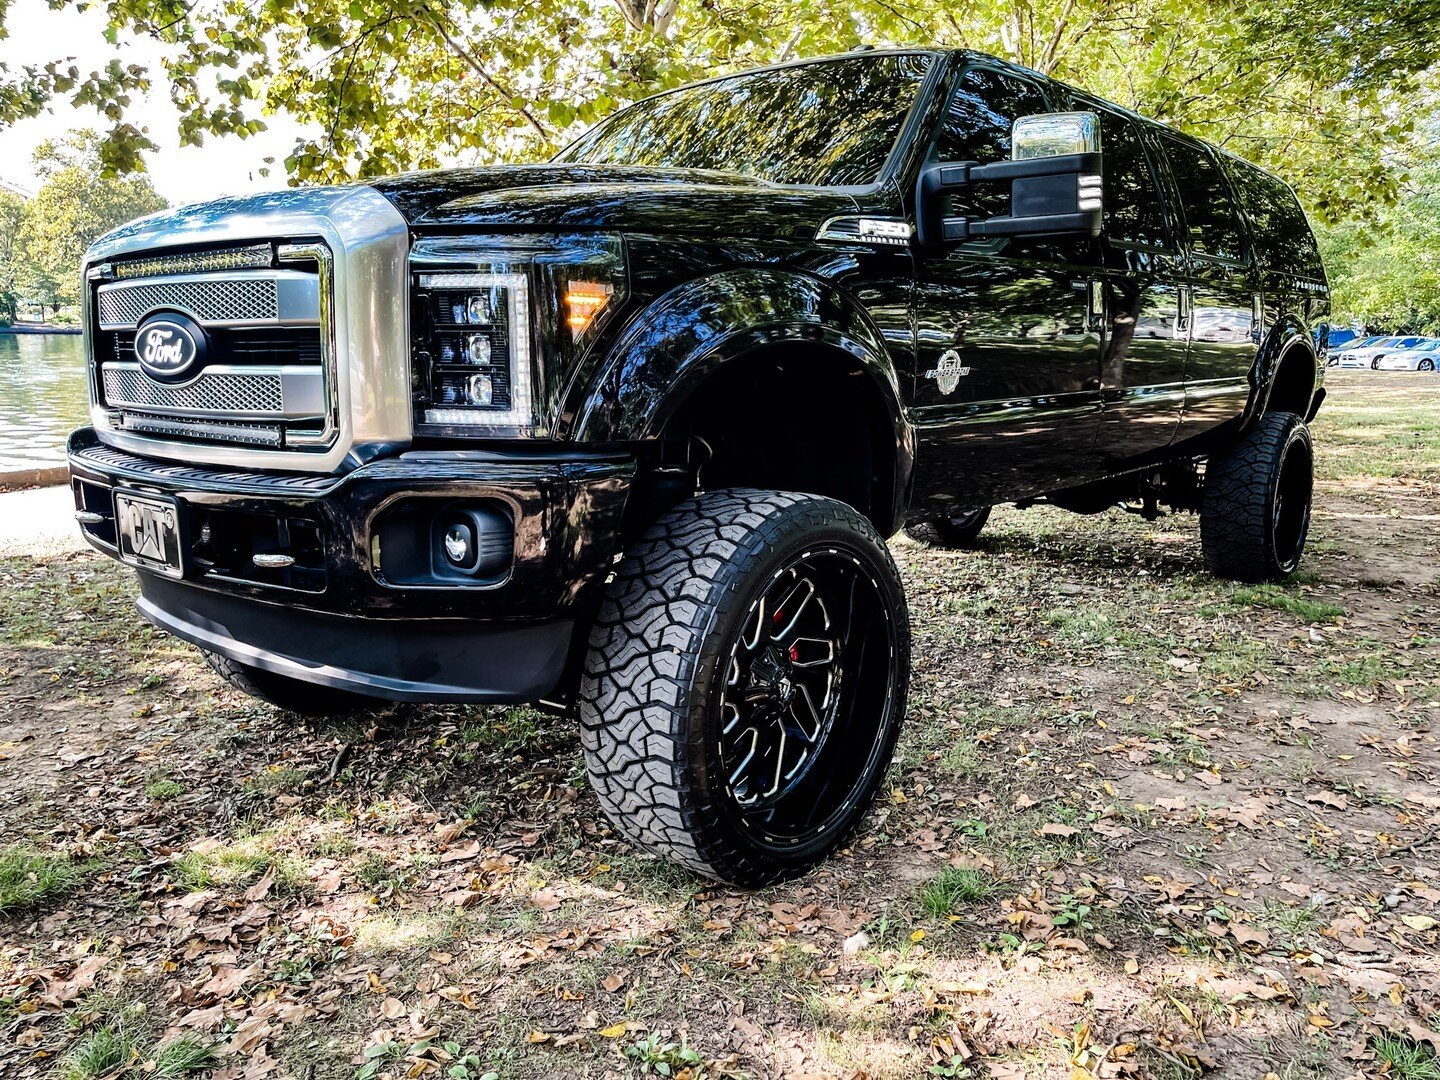 We would list what is custom on this one...but the list of what is NOT custom is shorter. 

#southernfleetcustoms #customauto #liftkit #customwheels #customford #fordbuild #customexterior #custominterior #customlighting